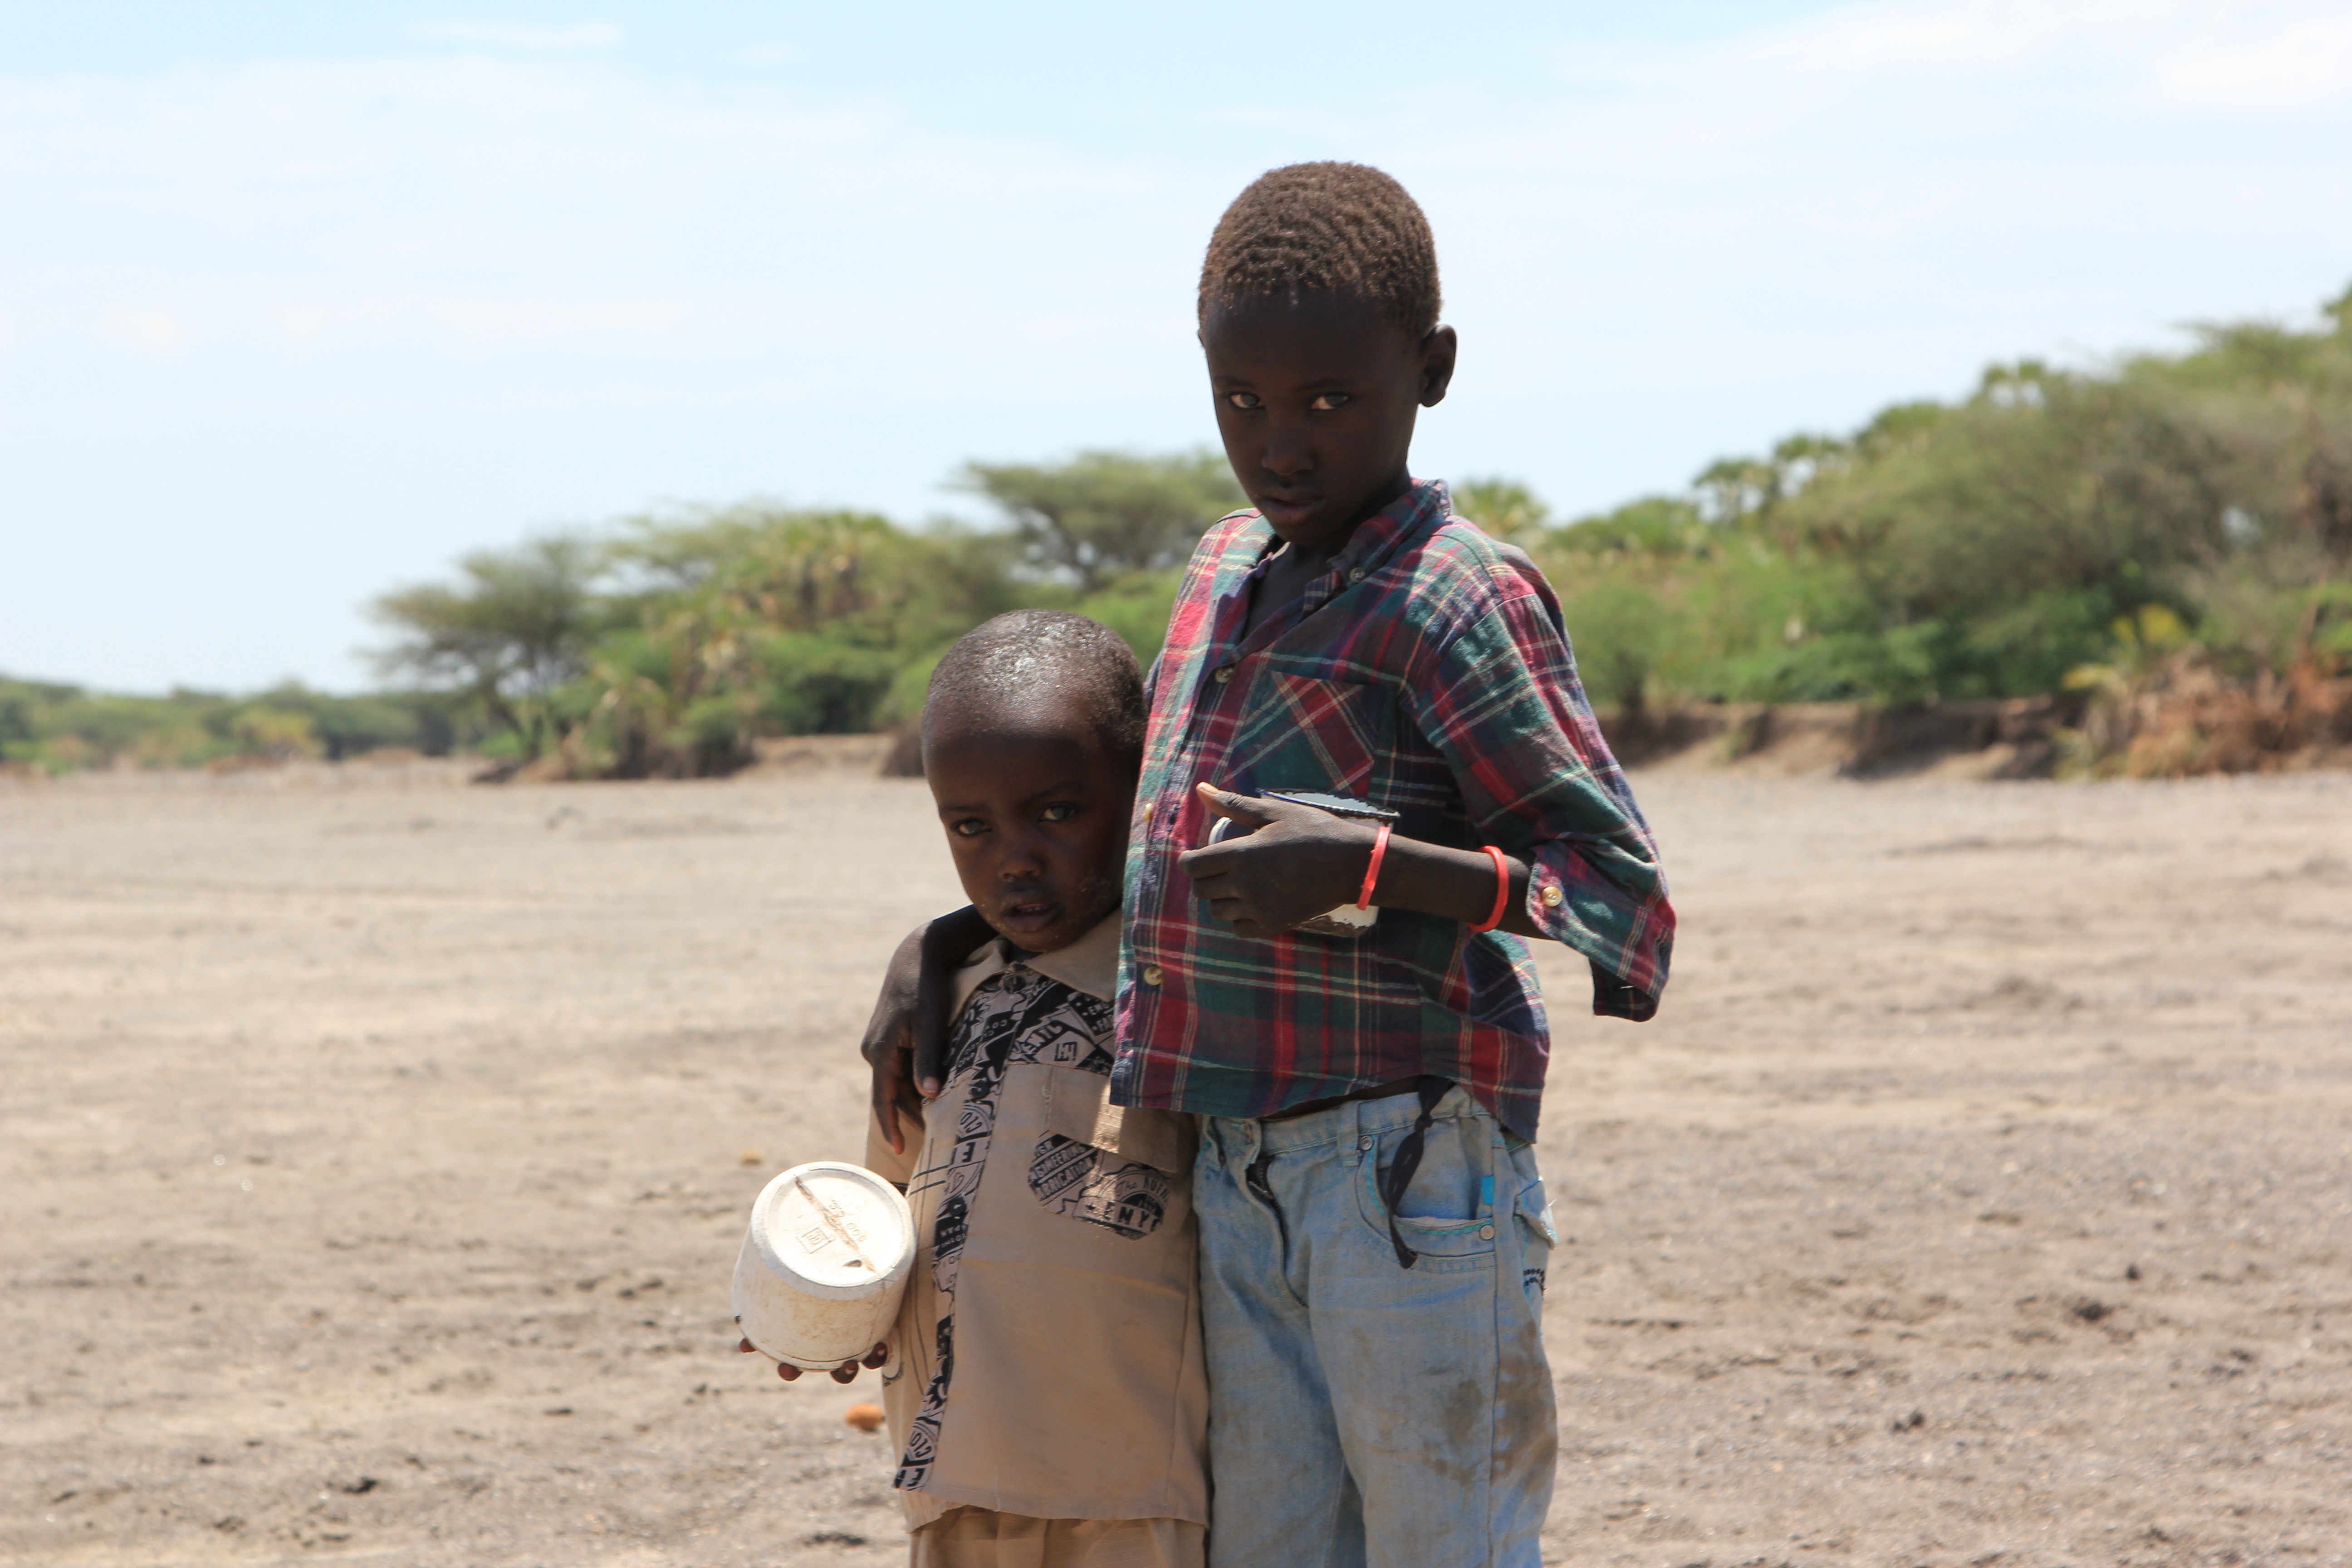 Two brothers search for water in Turkana. (Marisol Grandon/Wikimedia Commons)